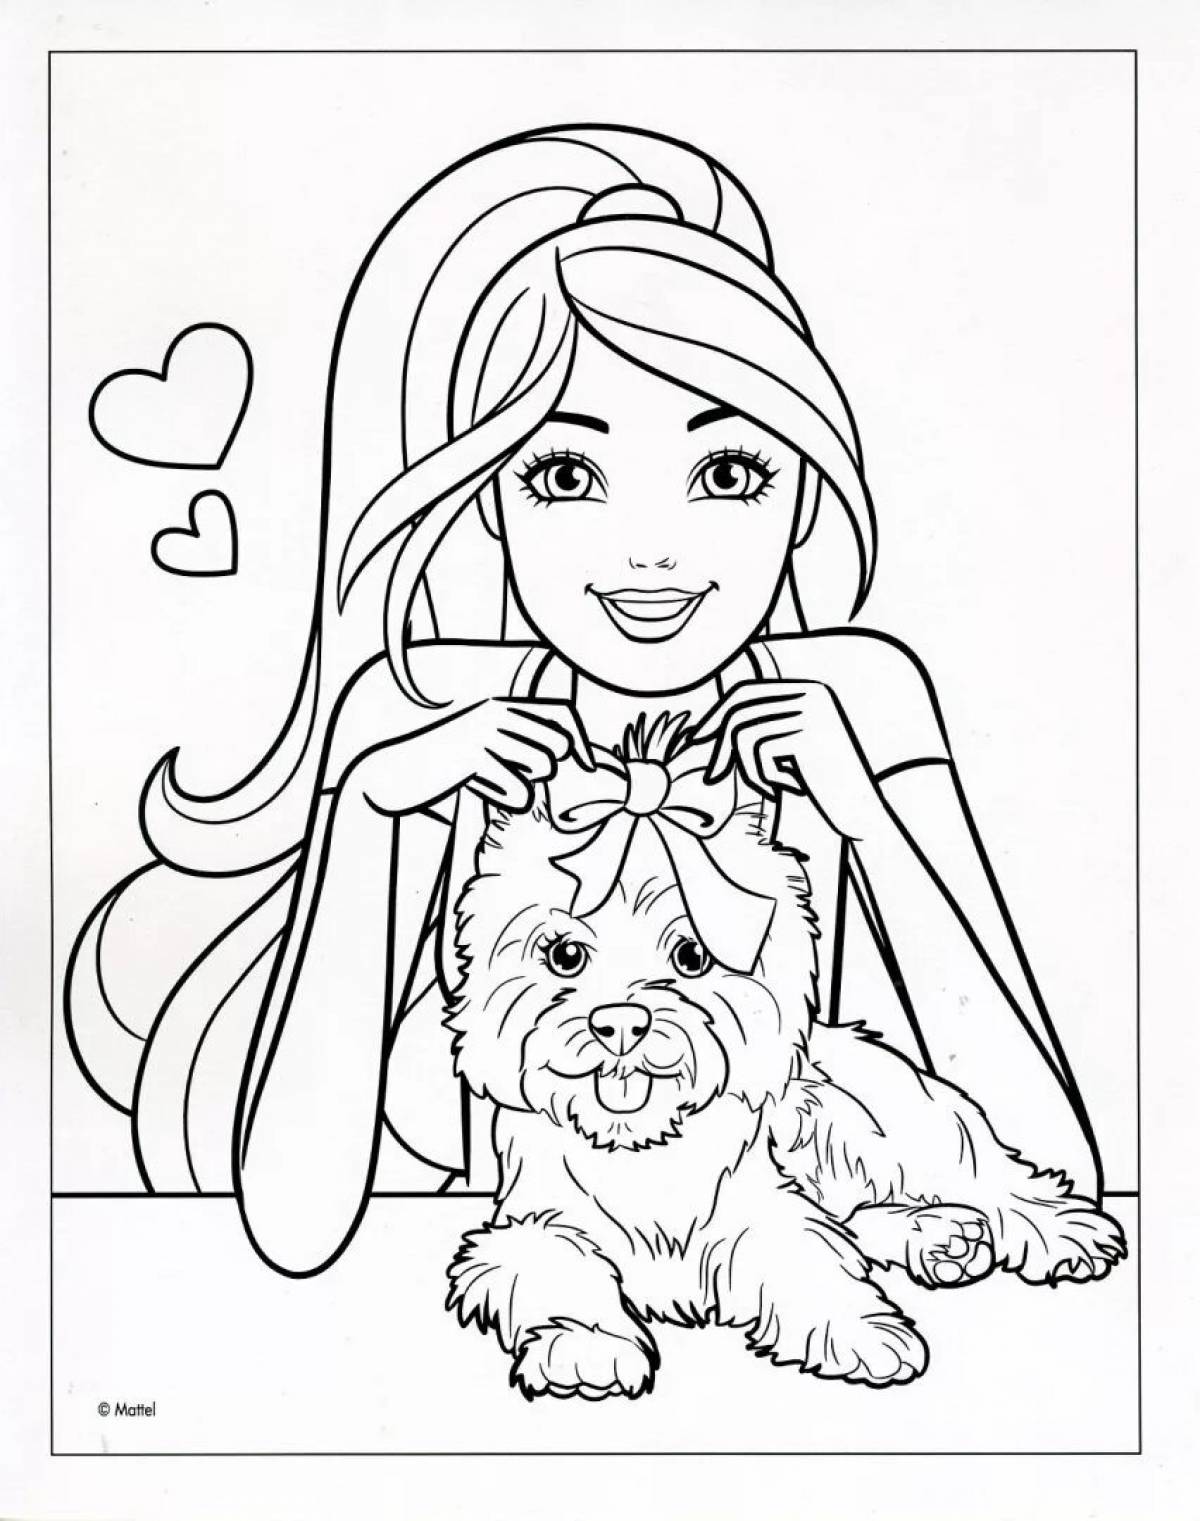 Animated coloring of barbie with a dog